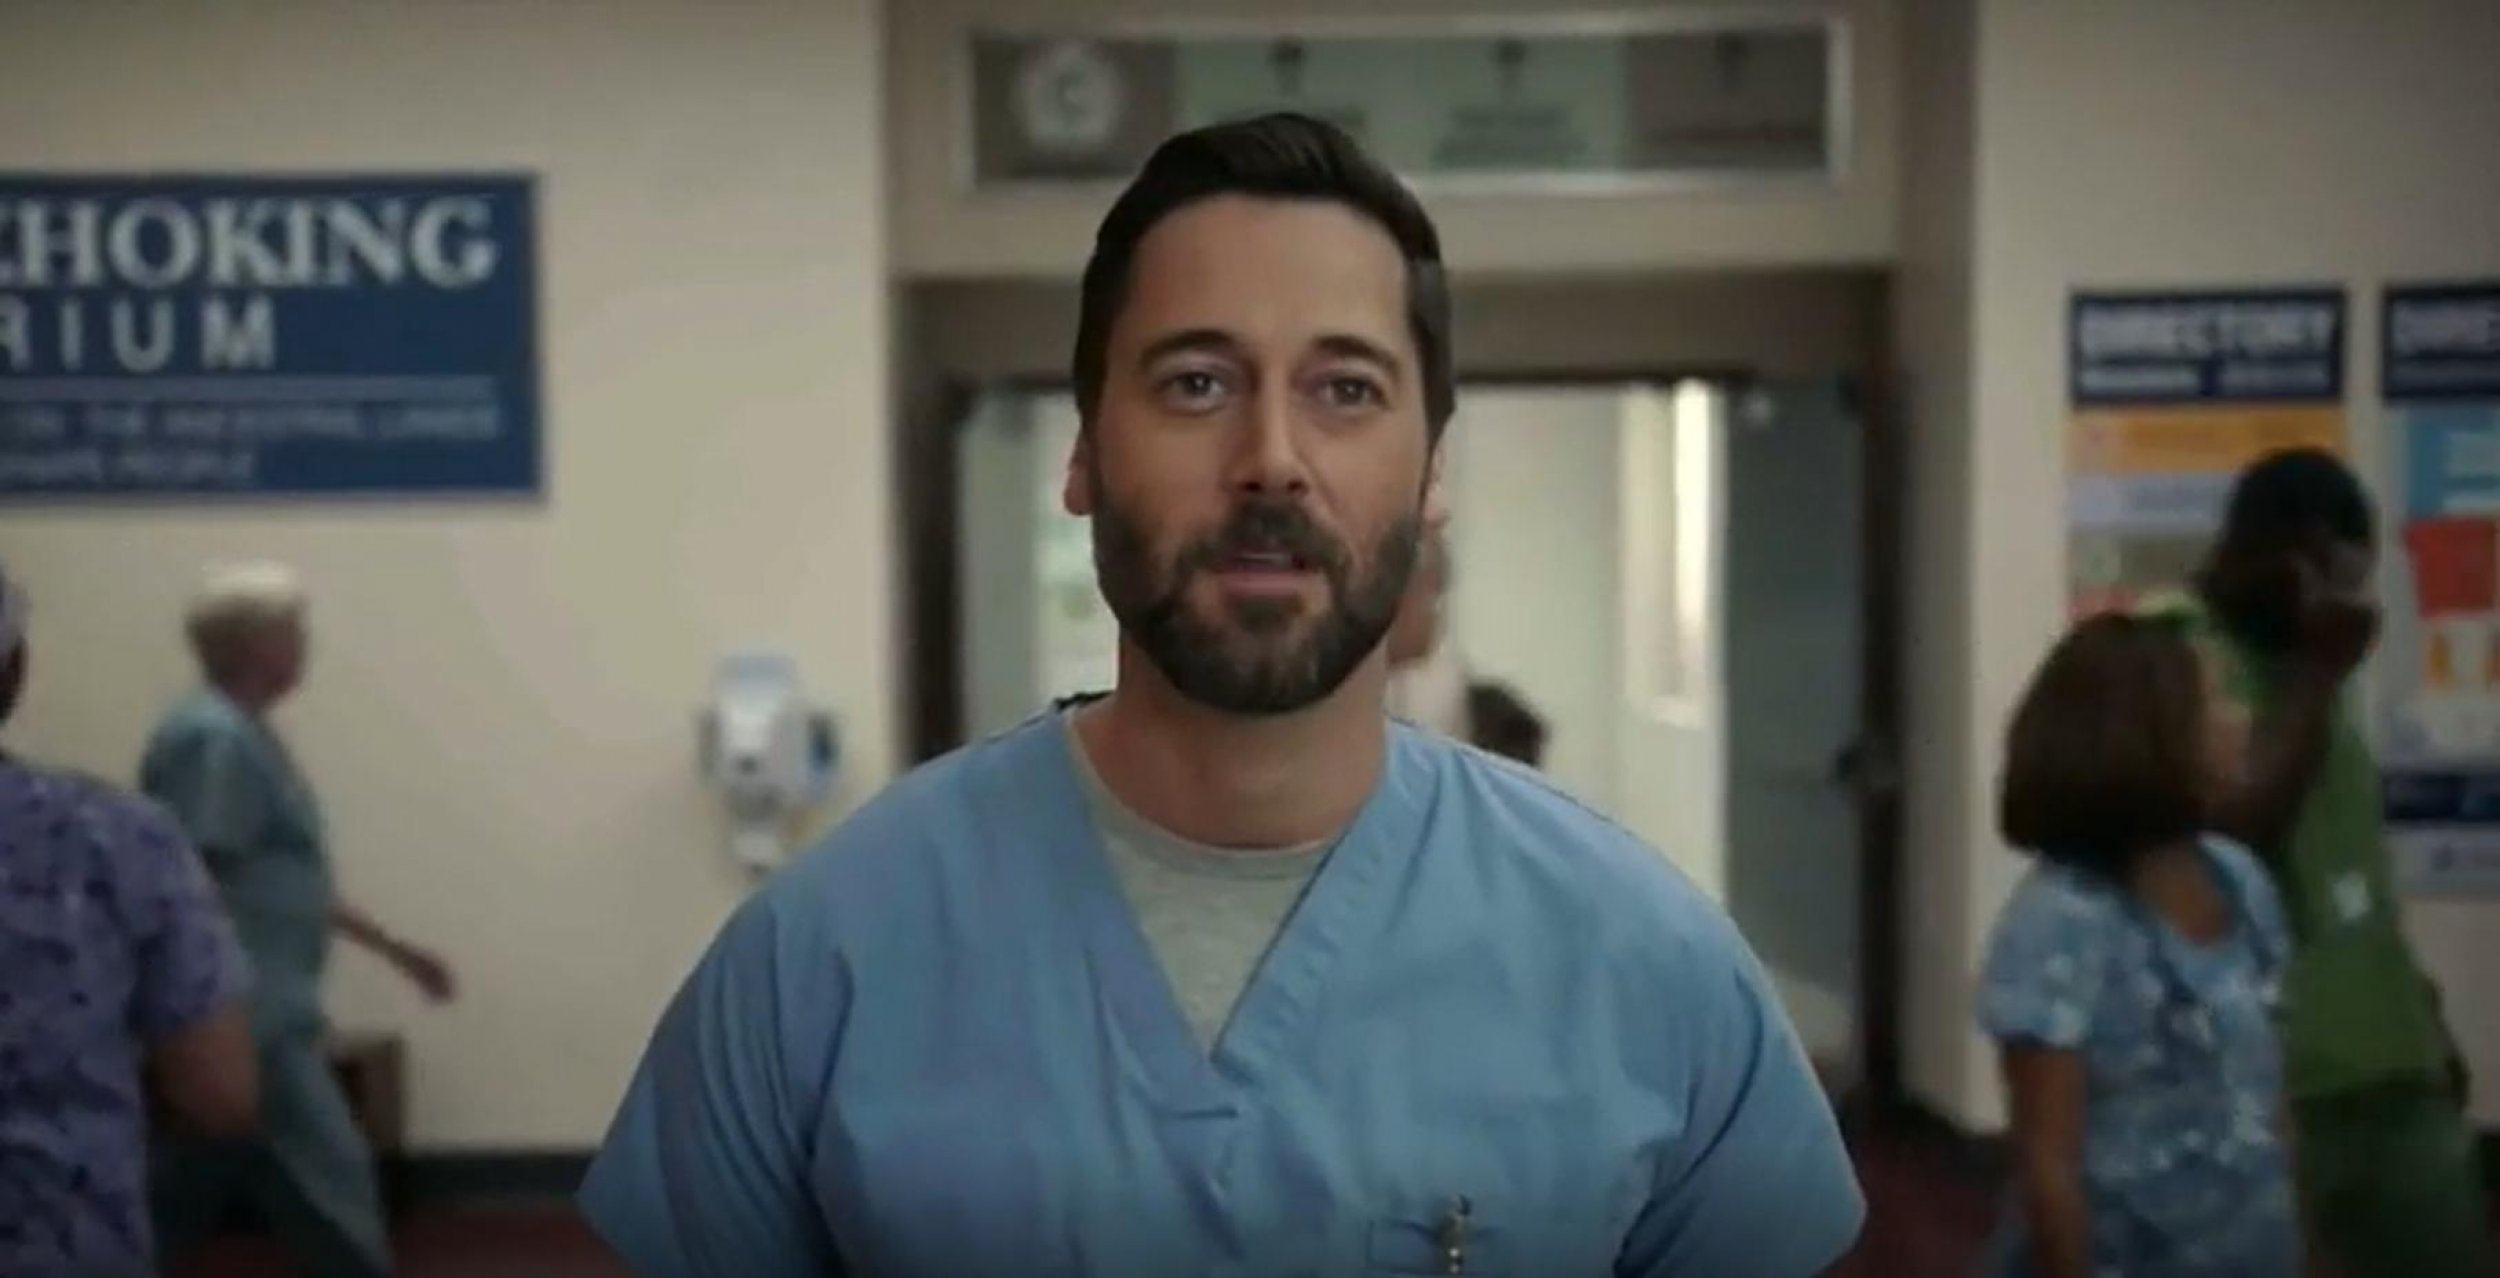 Watch The Promo For New Amsterdam Season 4